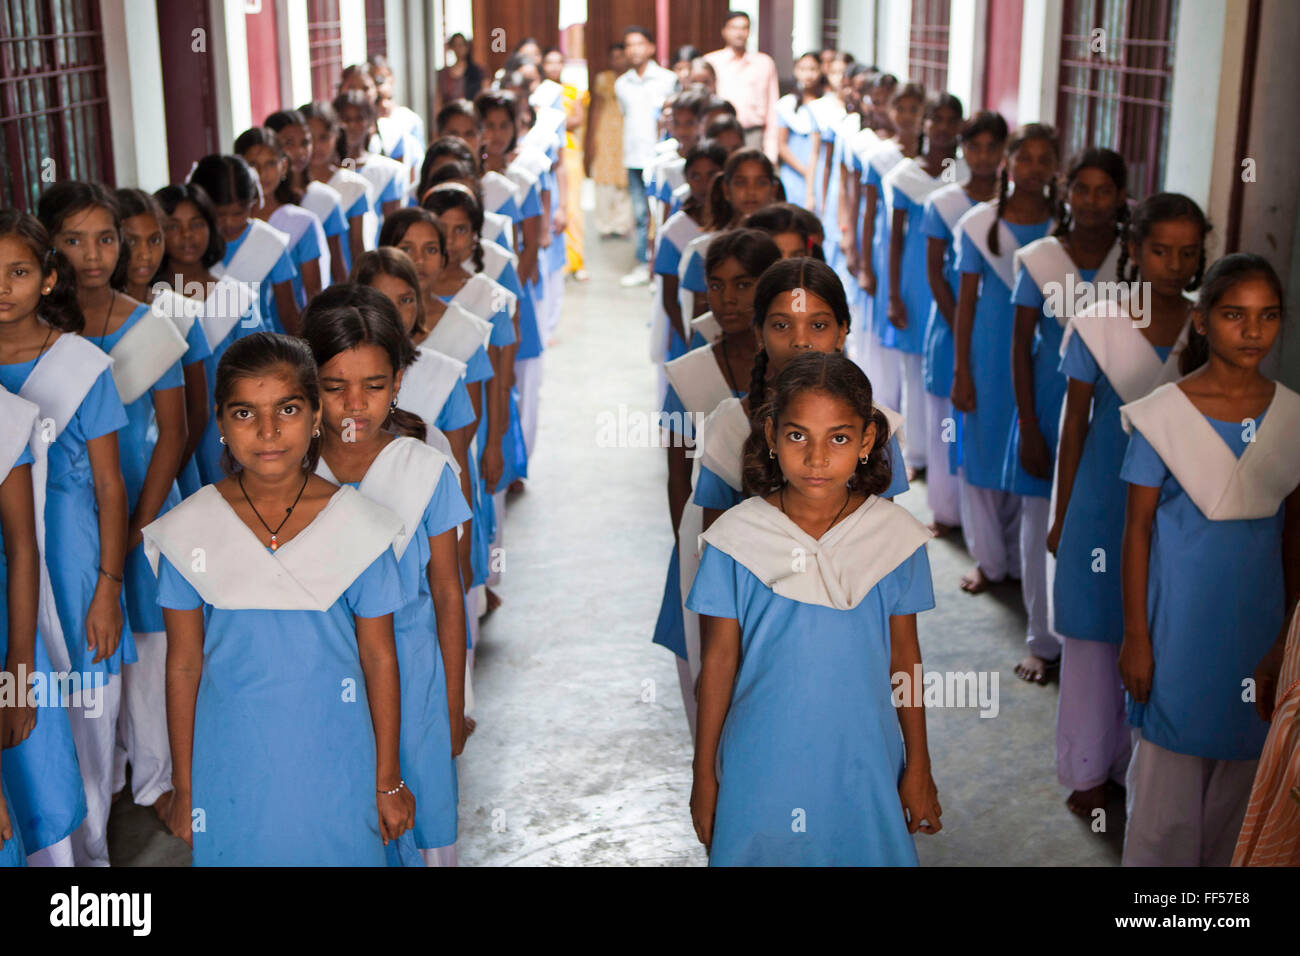 The school girls at the Kasturba Gandhi Balika Vidayala School in Gorakhpur, India. These girls wouldn’t normally be able to go to school and are funded by Manav Seva Sansthan, MSS organisation. The non-profit organization pay for their rent, food and clothes as part of their anti trafficking project. Stock Photo